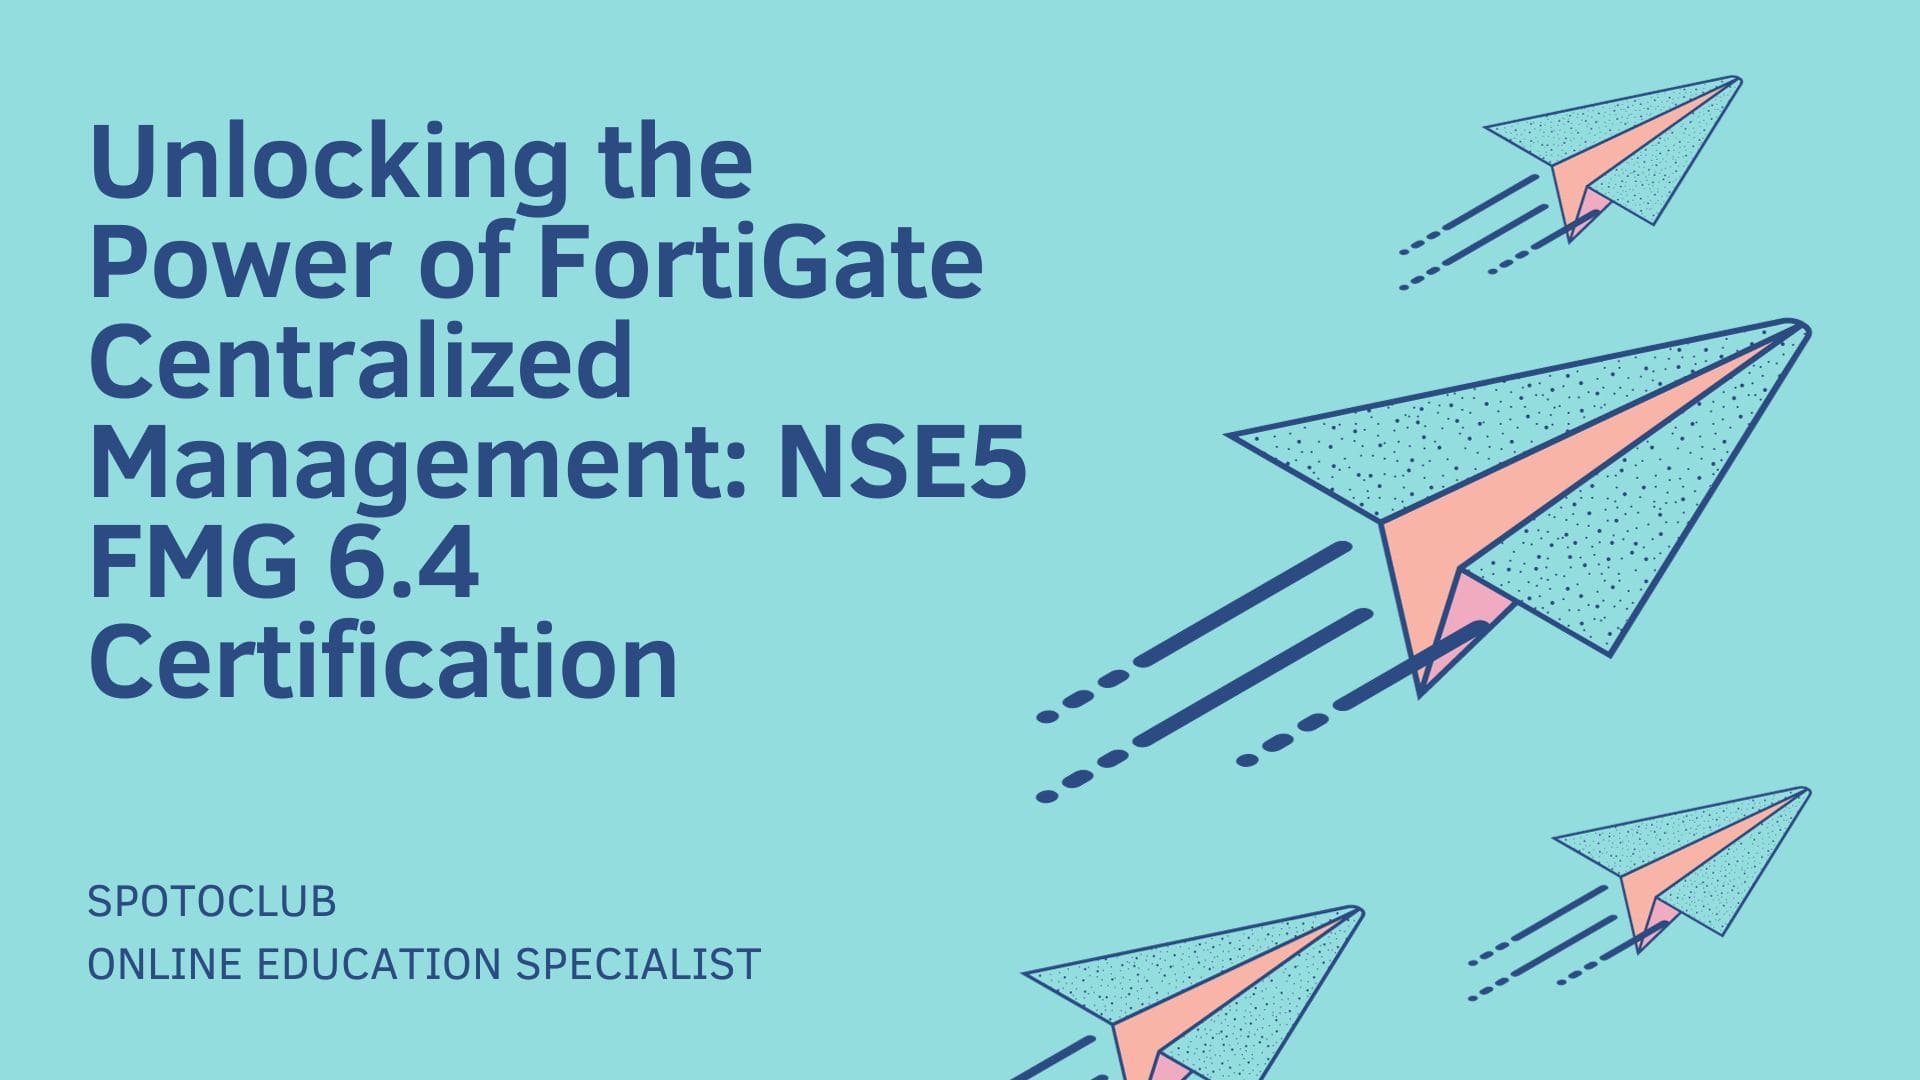 NSE5 FMG 6.4 Certification